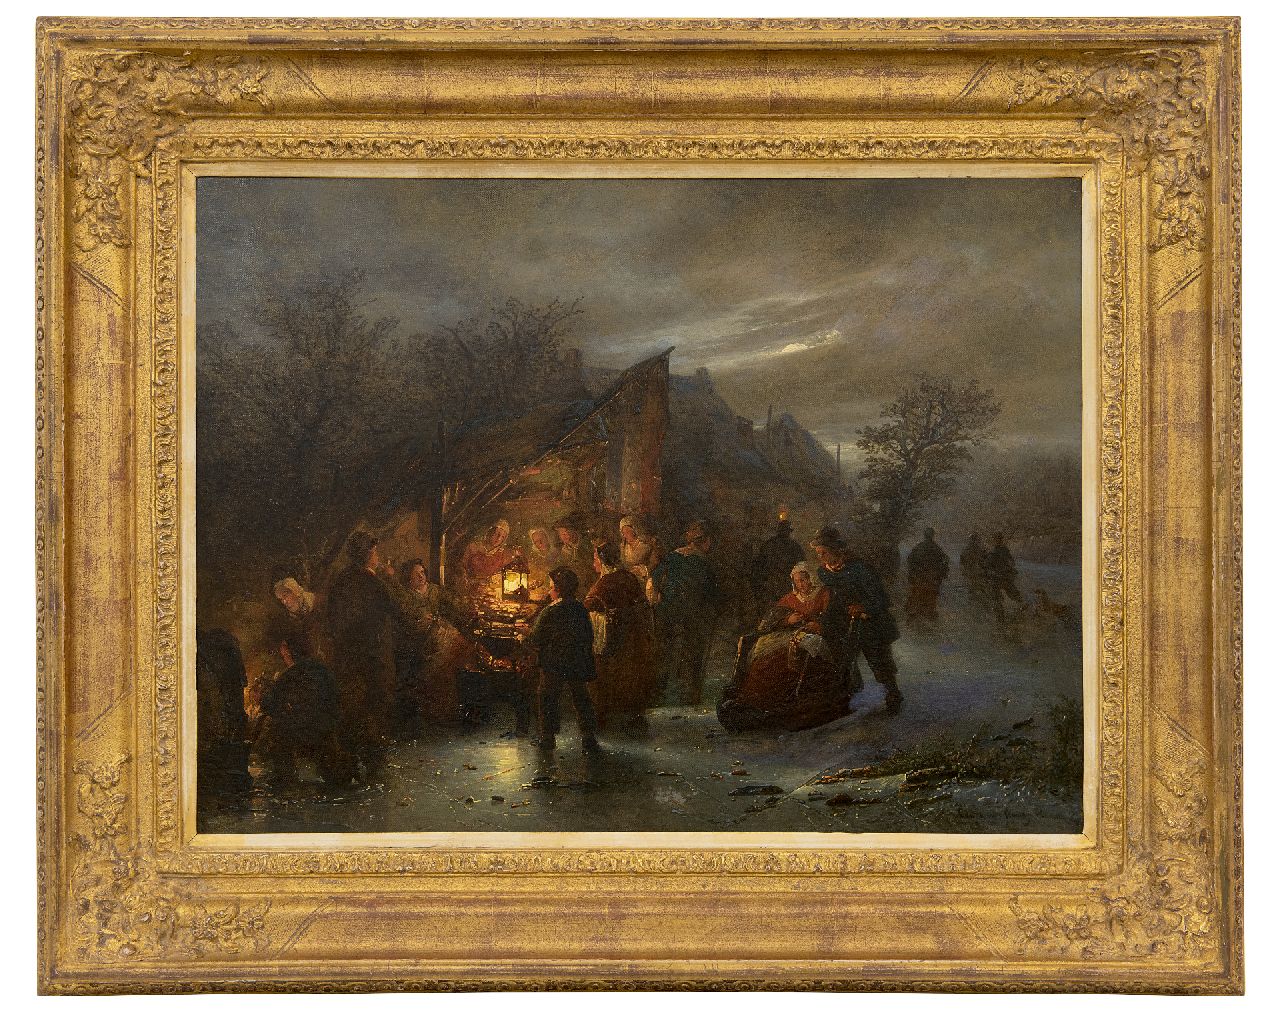 Haanen G.G.  | George Gillis Haanen | Paintings offered for sale | Night scene on the ice by a koek-en-zopie, oil on canvas 45.2 x 60.3 cm, signed l.r.